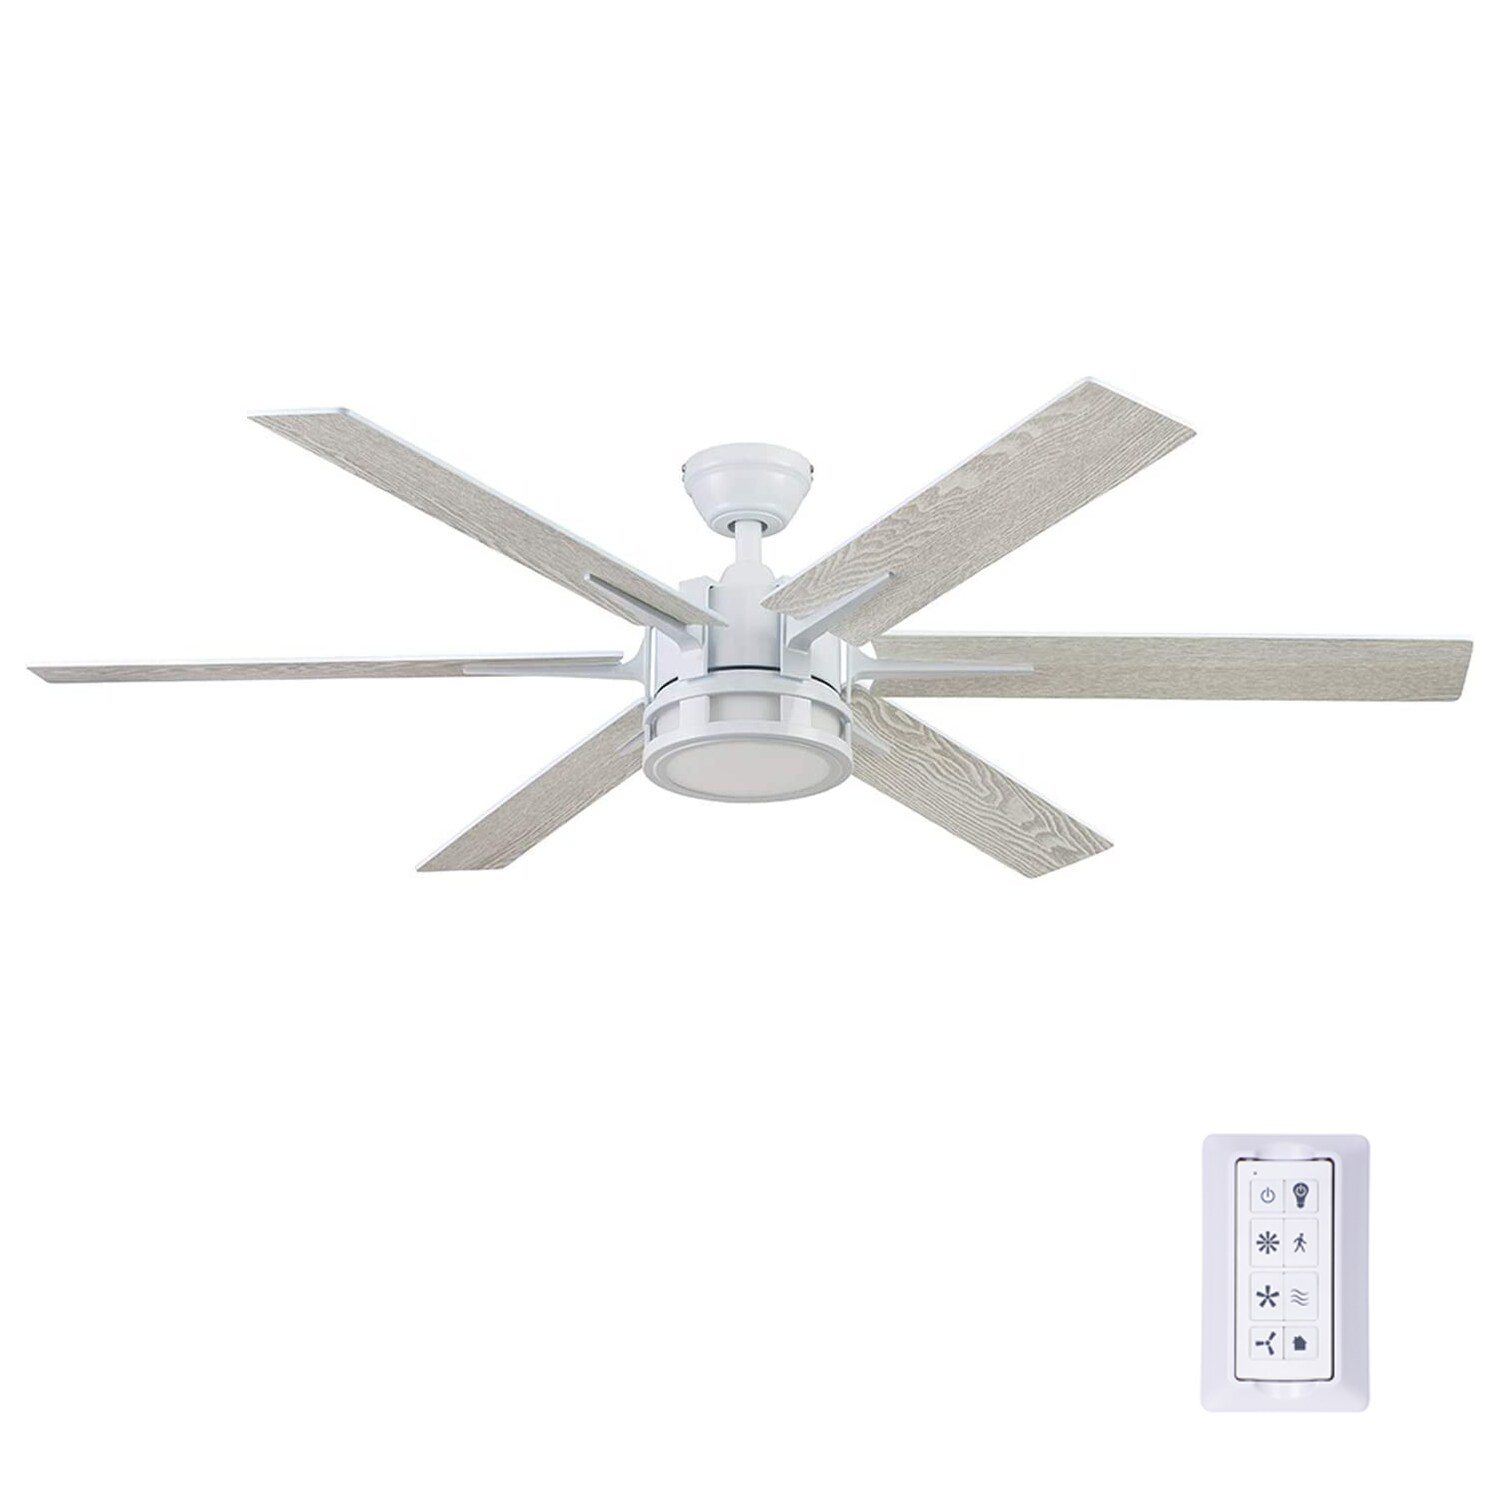 Details about   Honeywell Kaliza 56-inch LED Ceiling Fan With Remote Control 